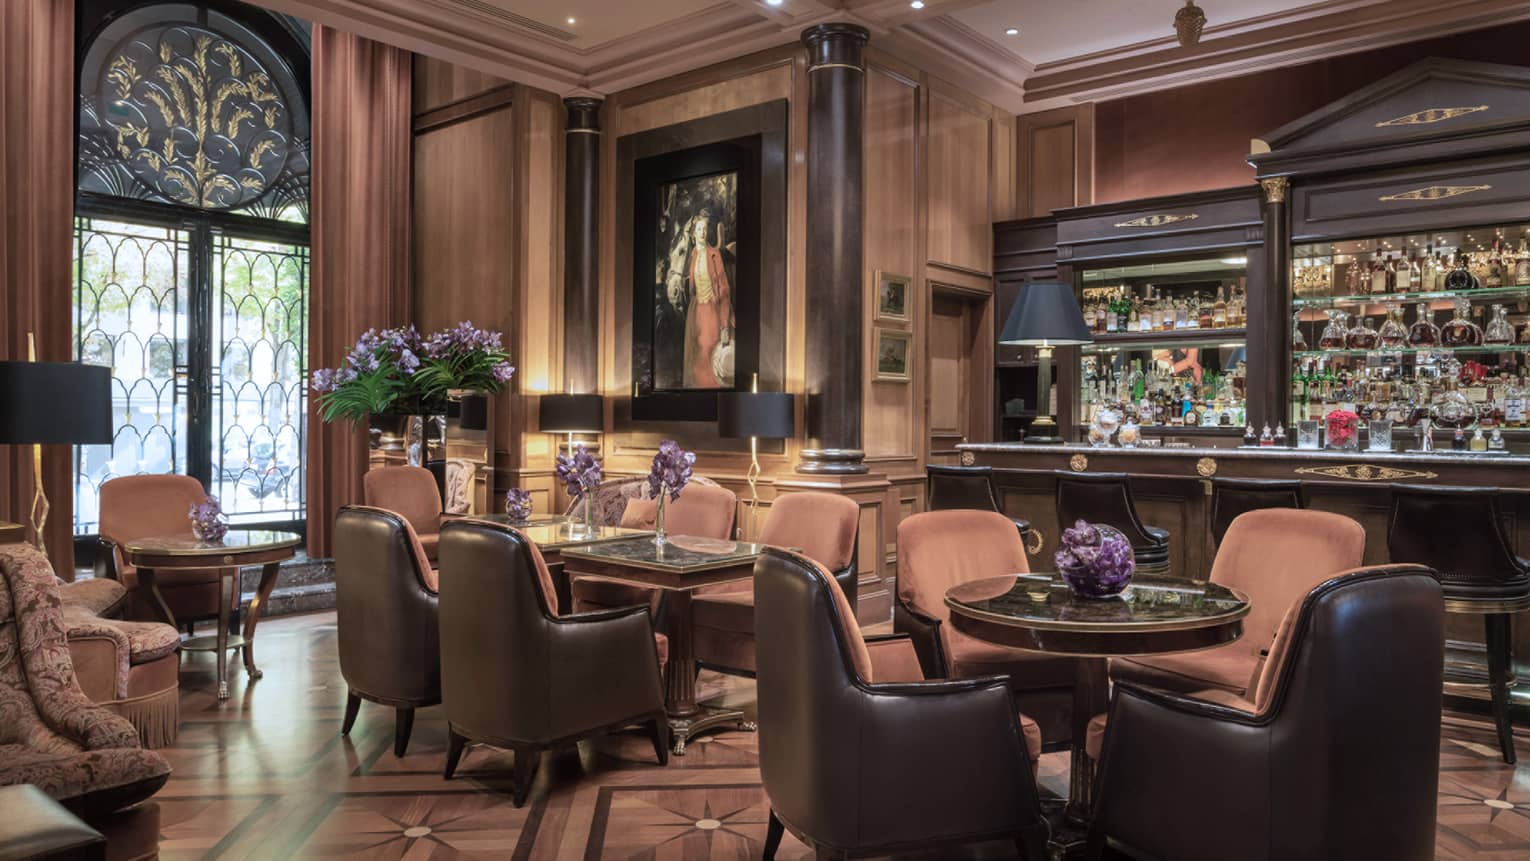 Bar with brown leather barstools and lounge area with rust-colored club-style seating, black lamps and purple flower arrangements